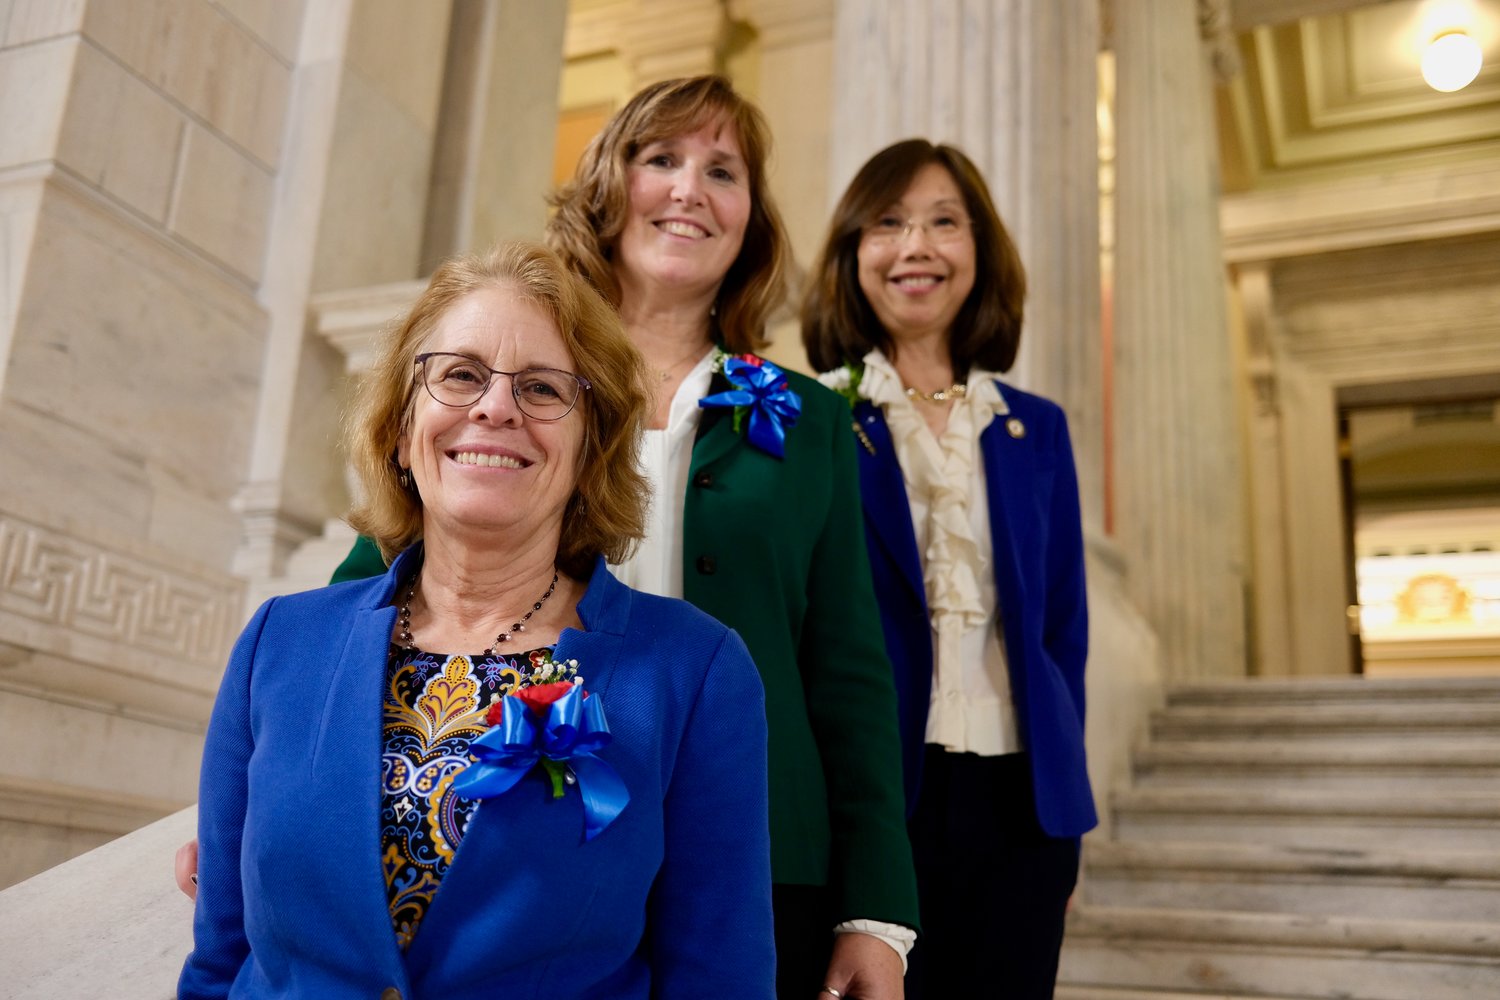 Rep. Terri Cortvriend, Rep. Michelle McGaw, and Sen. Linda Ujifusa (front to back), all of Portsmouth, pose outside the Senate Chamber at the Rhode Island State House, shortly after swearing-in ceremonies Tuesday night. They’re making history for being the town’s first-ever all-female General Assembly delegation.